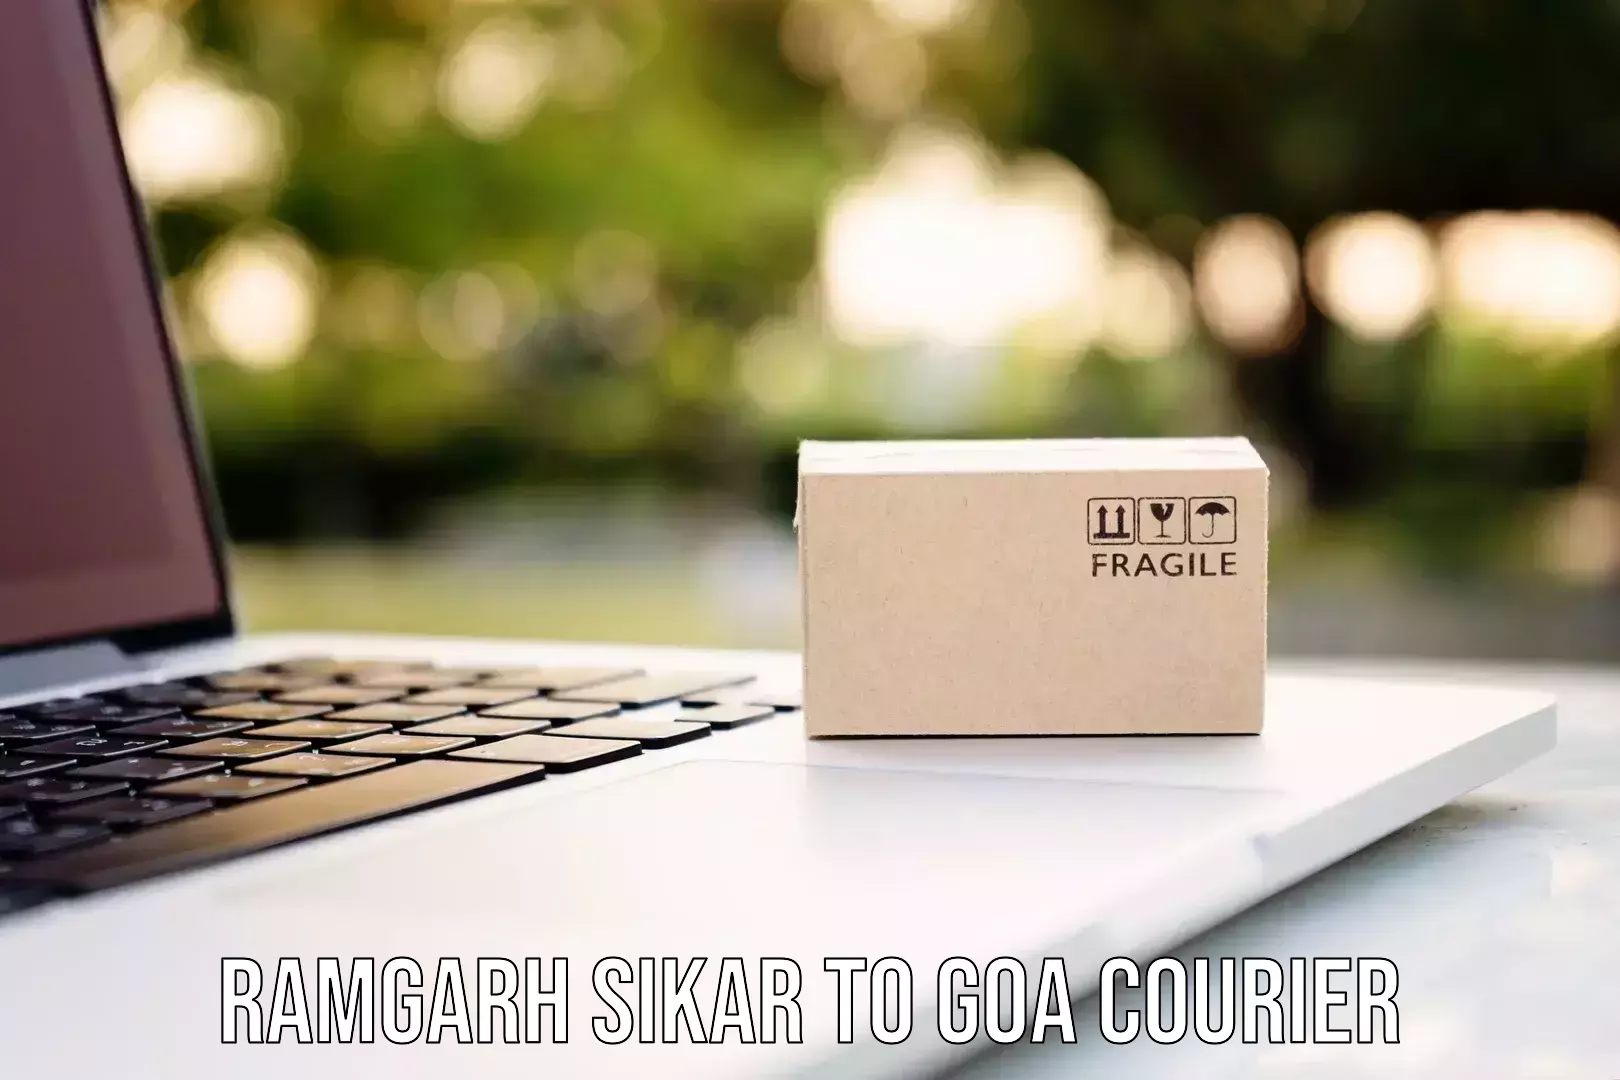 User-friendly delivery service Ramgarh Sikar to South Goa